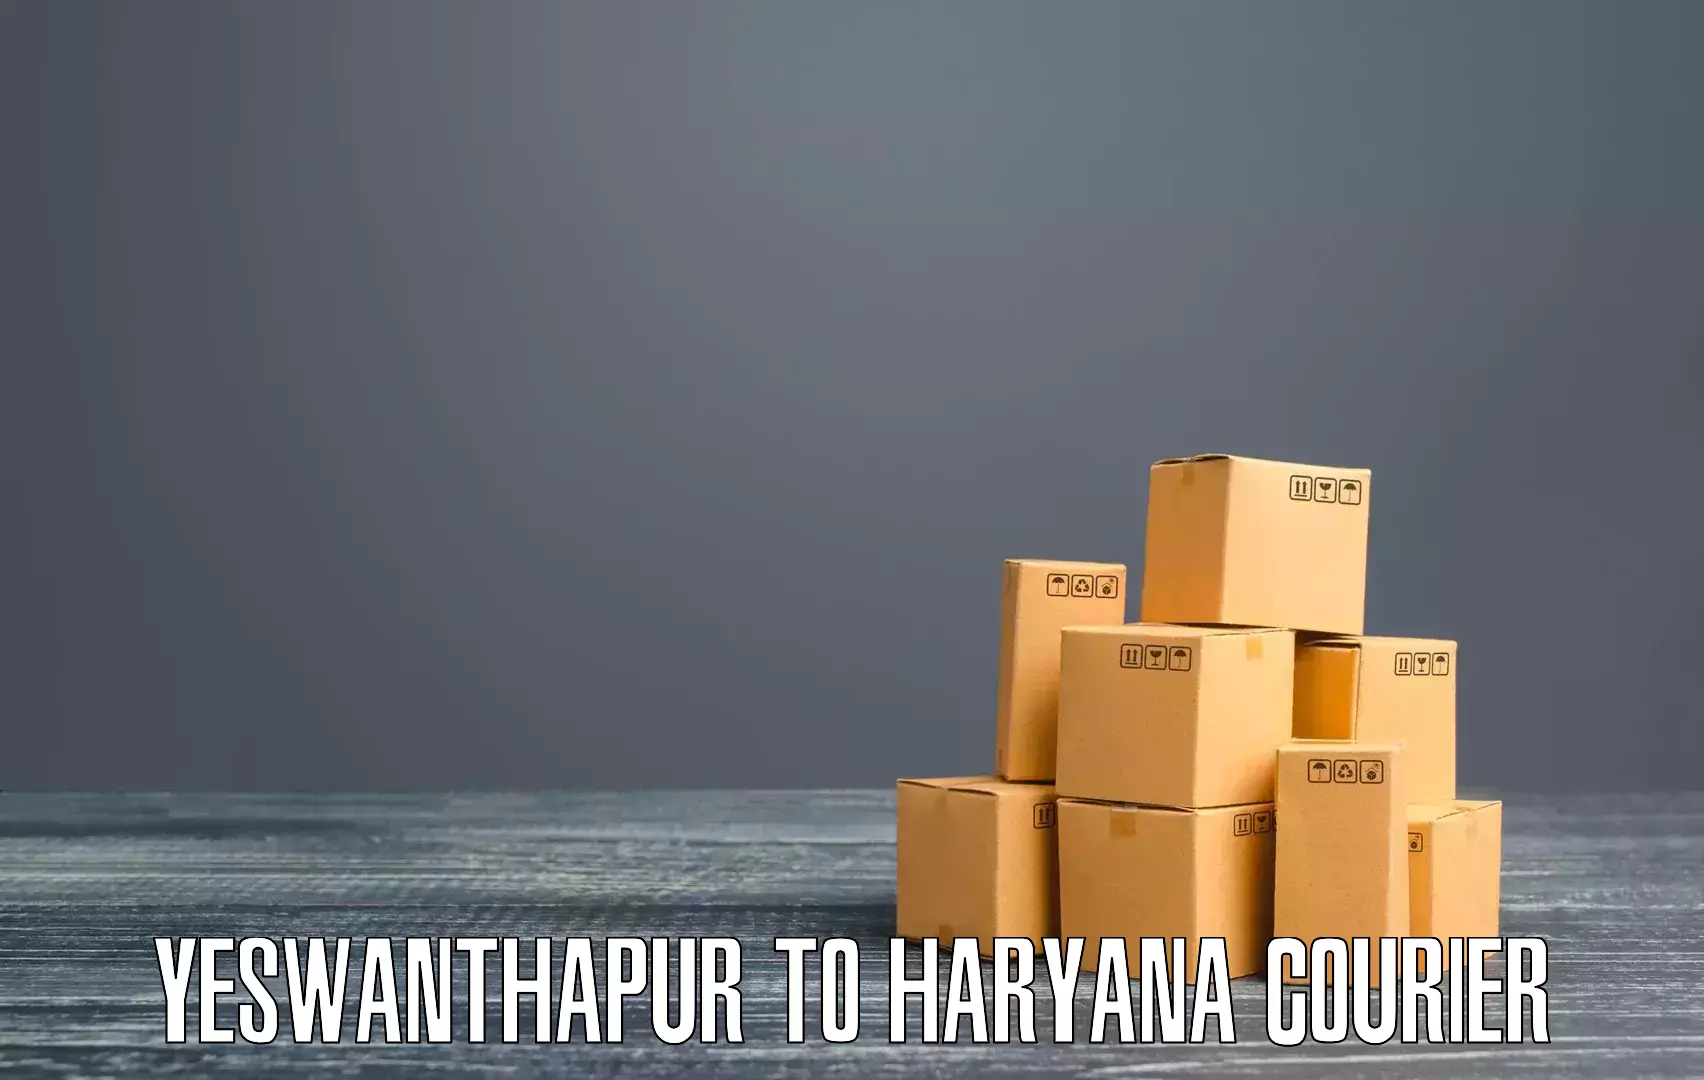 On-demand courier in Yeswanthapur to Bahadurgarh